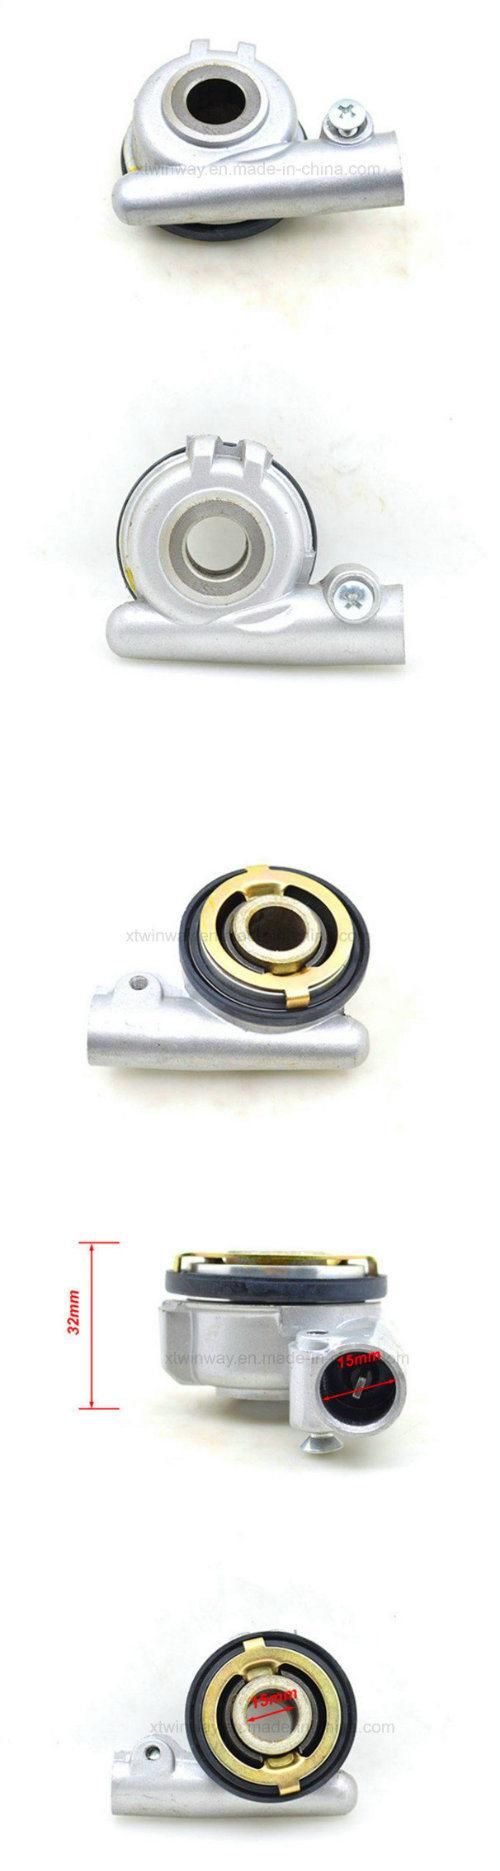 Cbt125 Motorcycle Speedometer Drive Gear Motorcycle Parts